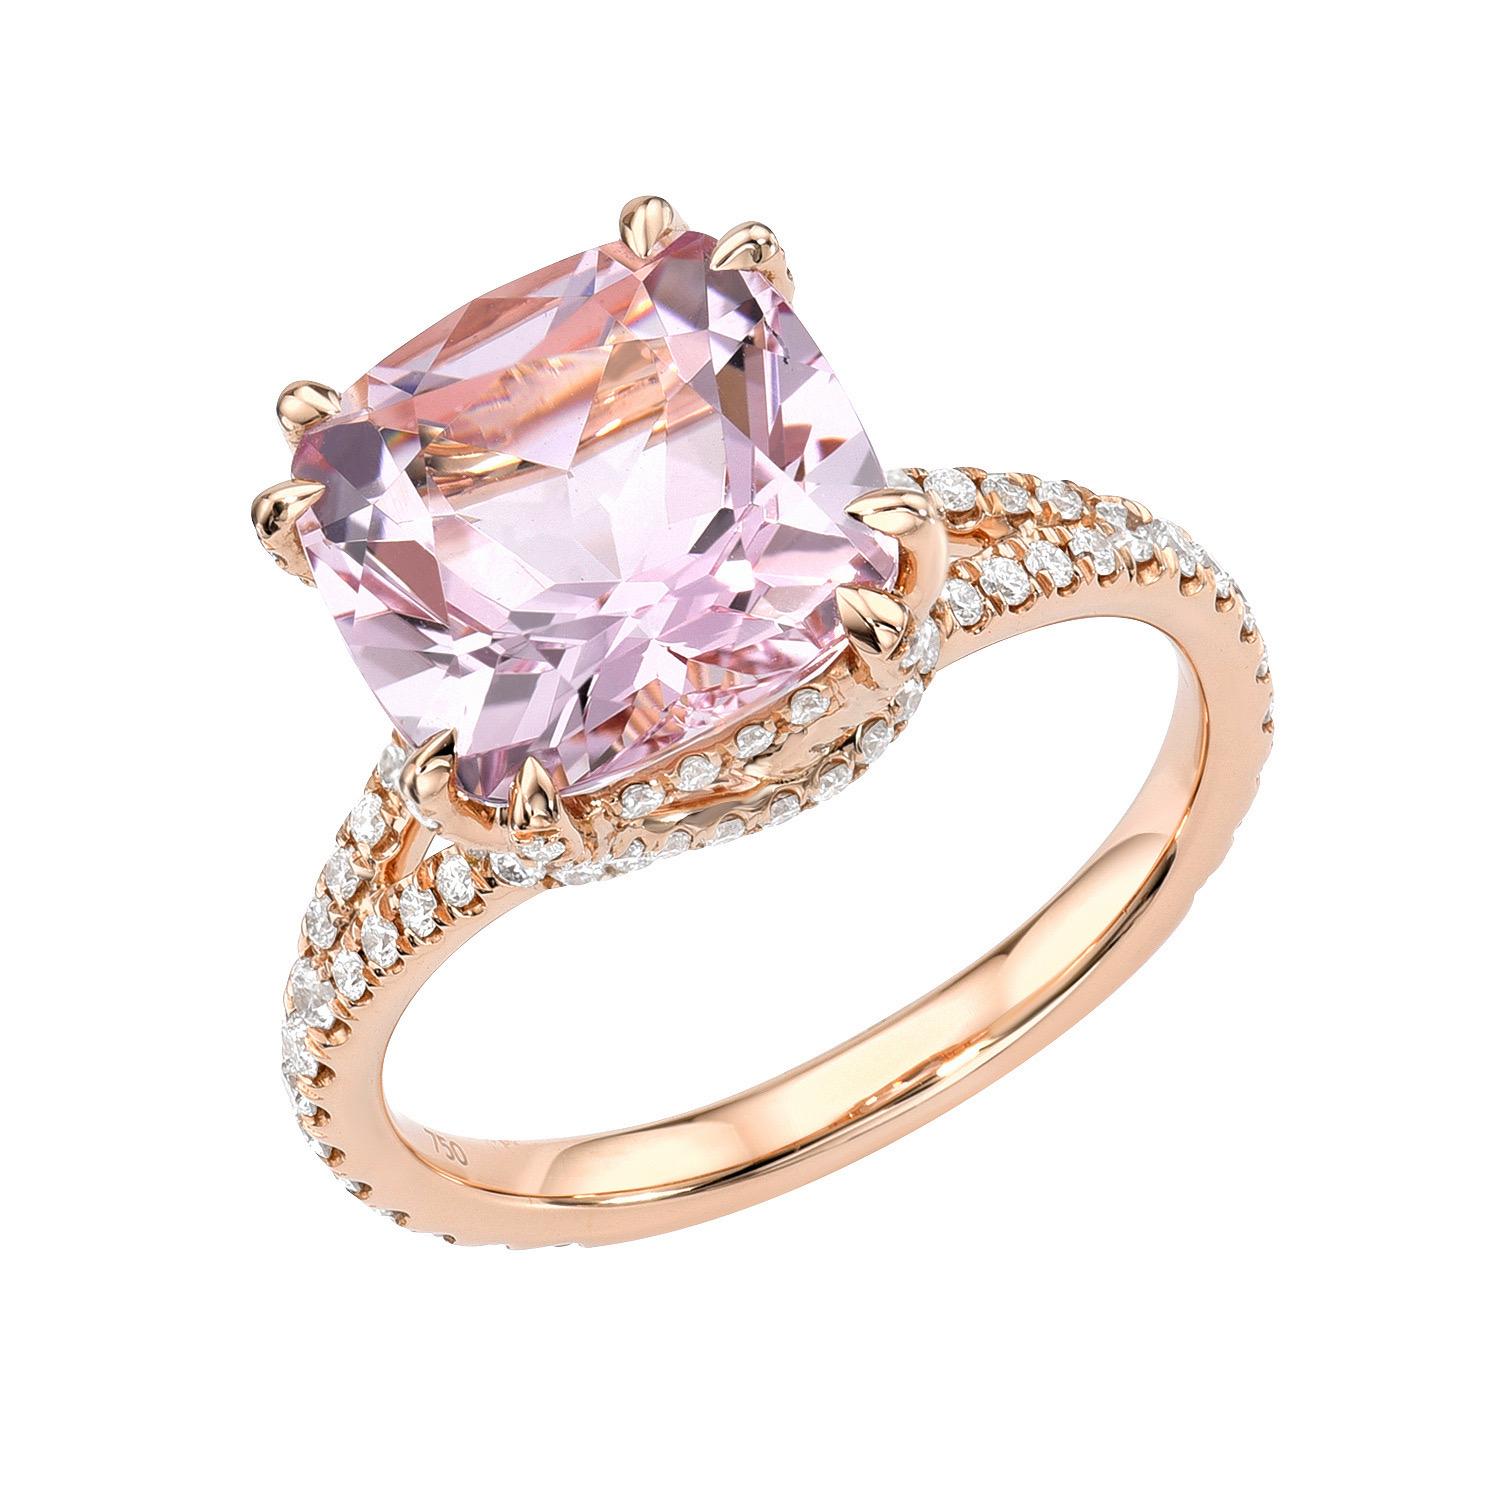 Spectacular 3.90 carat Morganite cushion, 18K rose gold ring, decorated with a total of 0.63 carat round brilliant diamonds.
Ring size 6.5. Resizing is complementary upon request.
Returns are accepted and paid by us within 7 days of